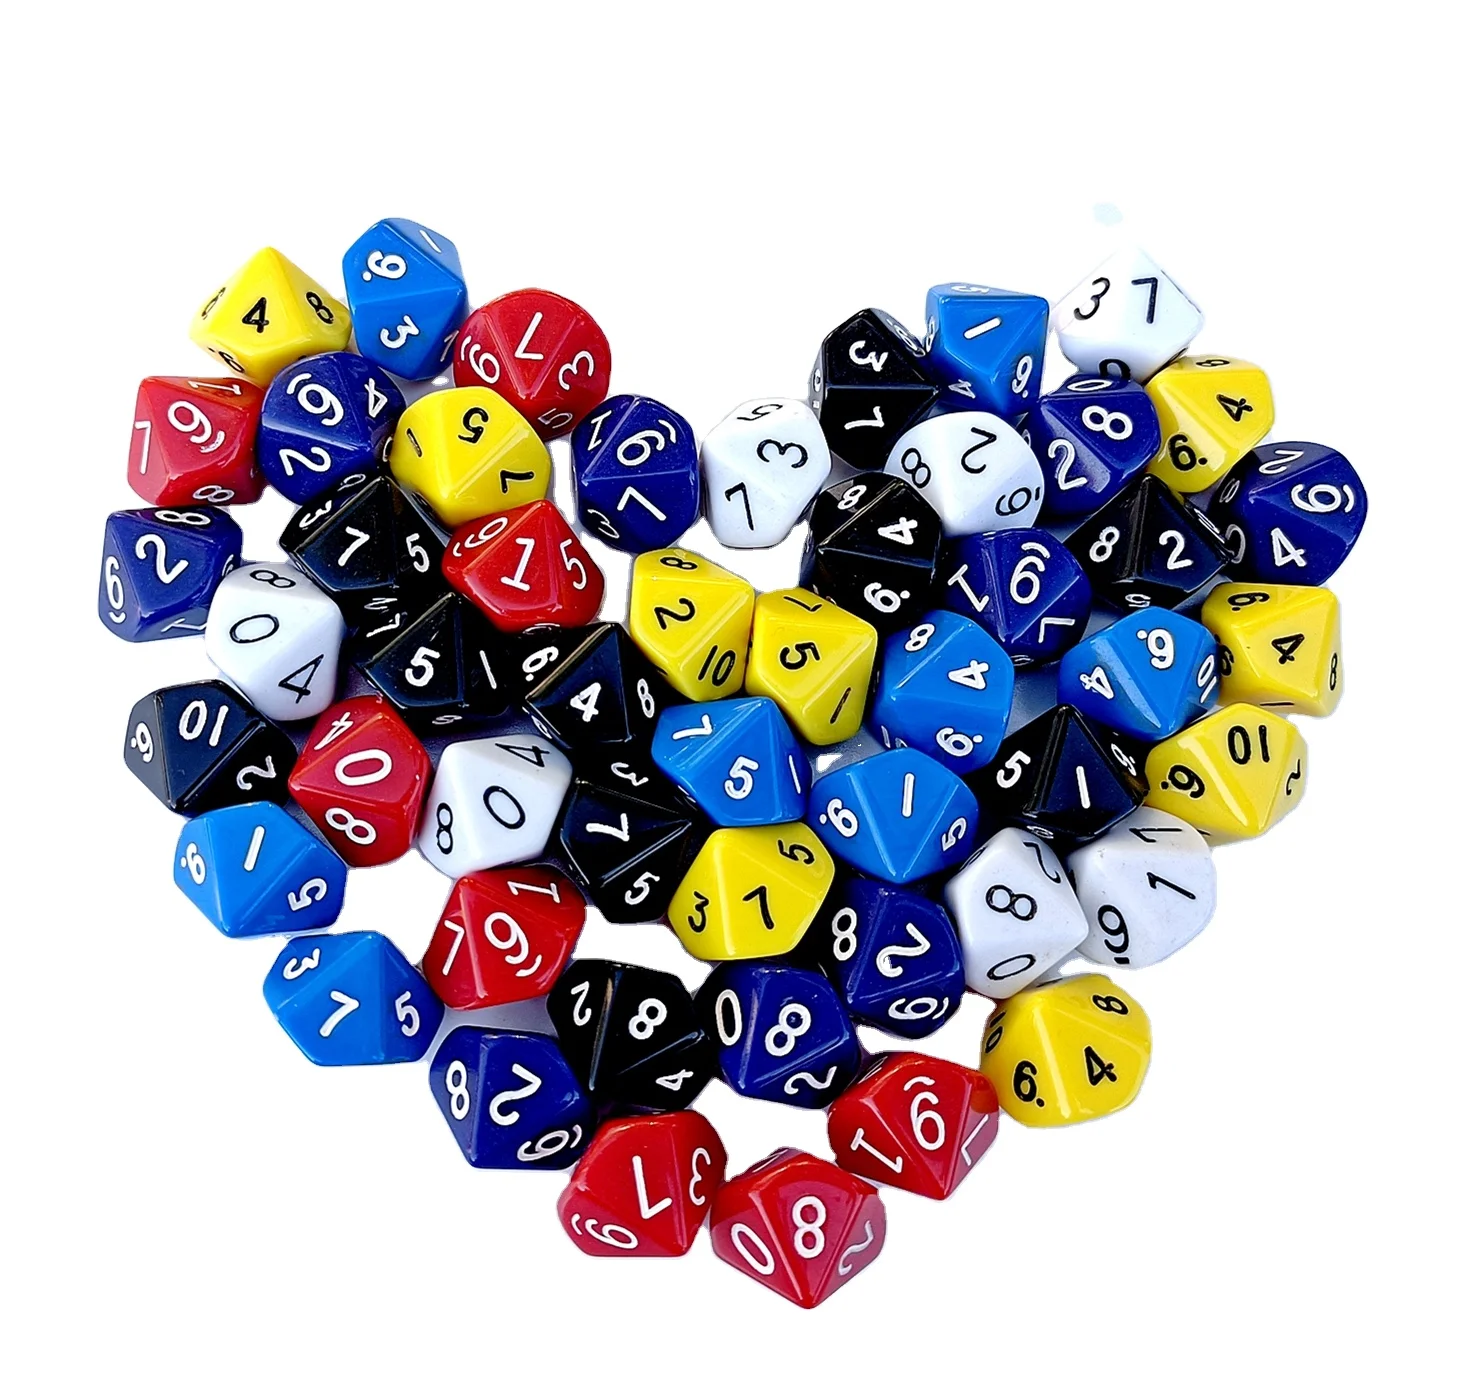 

Wholesale 10 sided polyhedral dice for board game